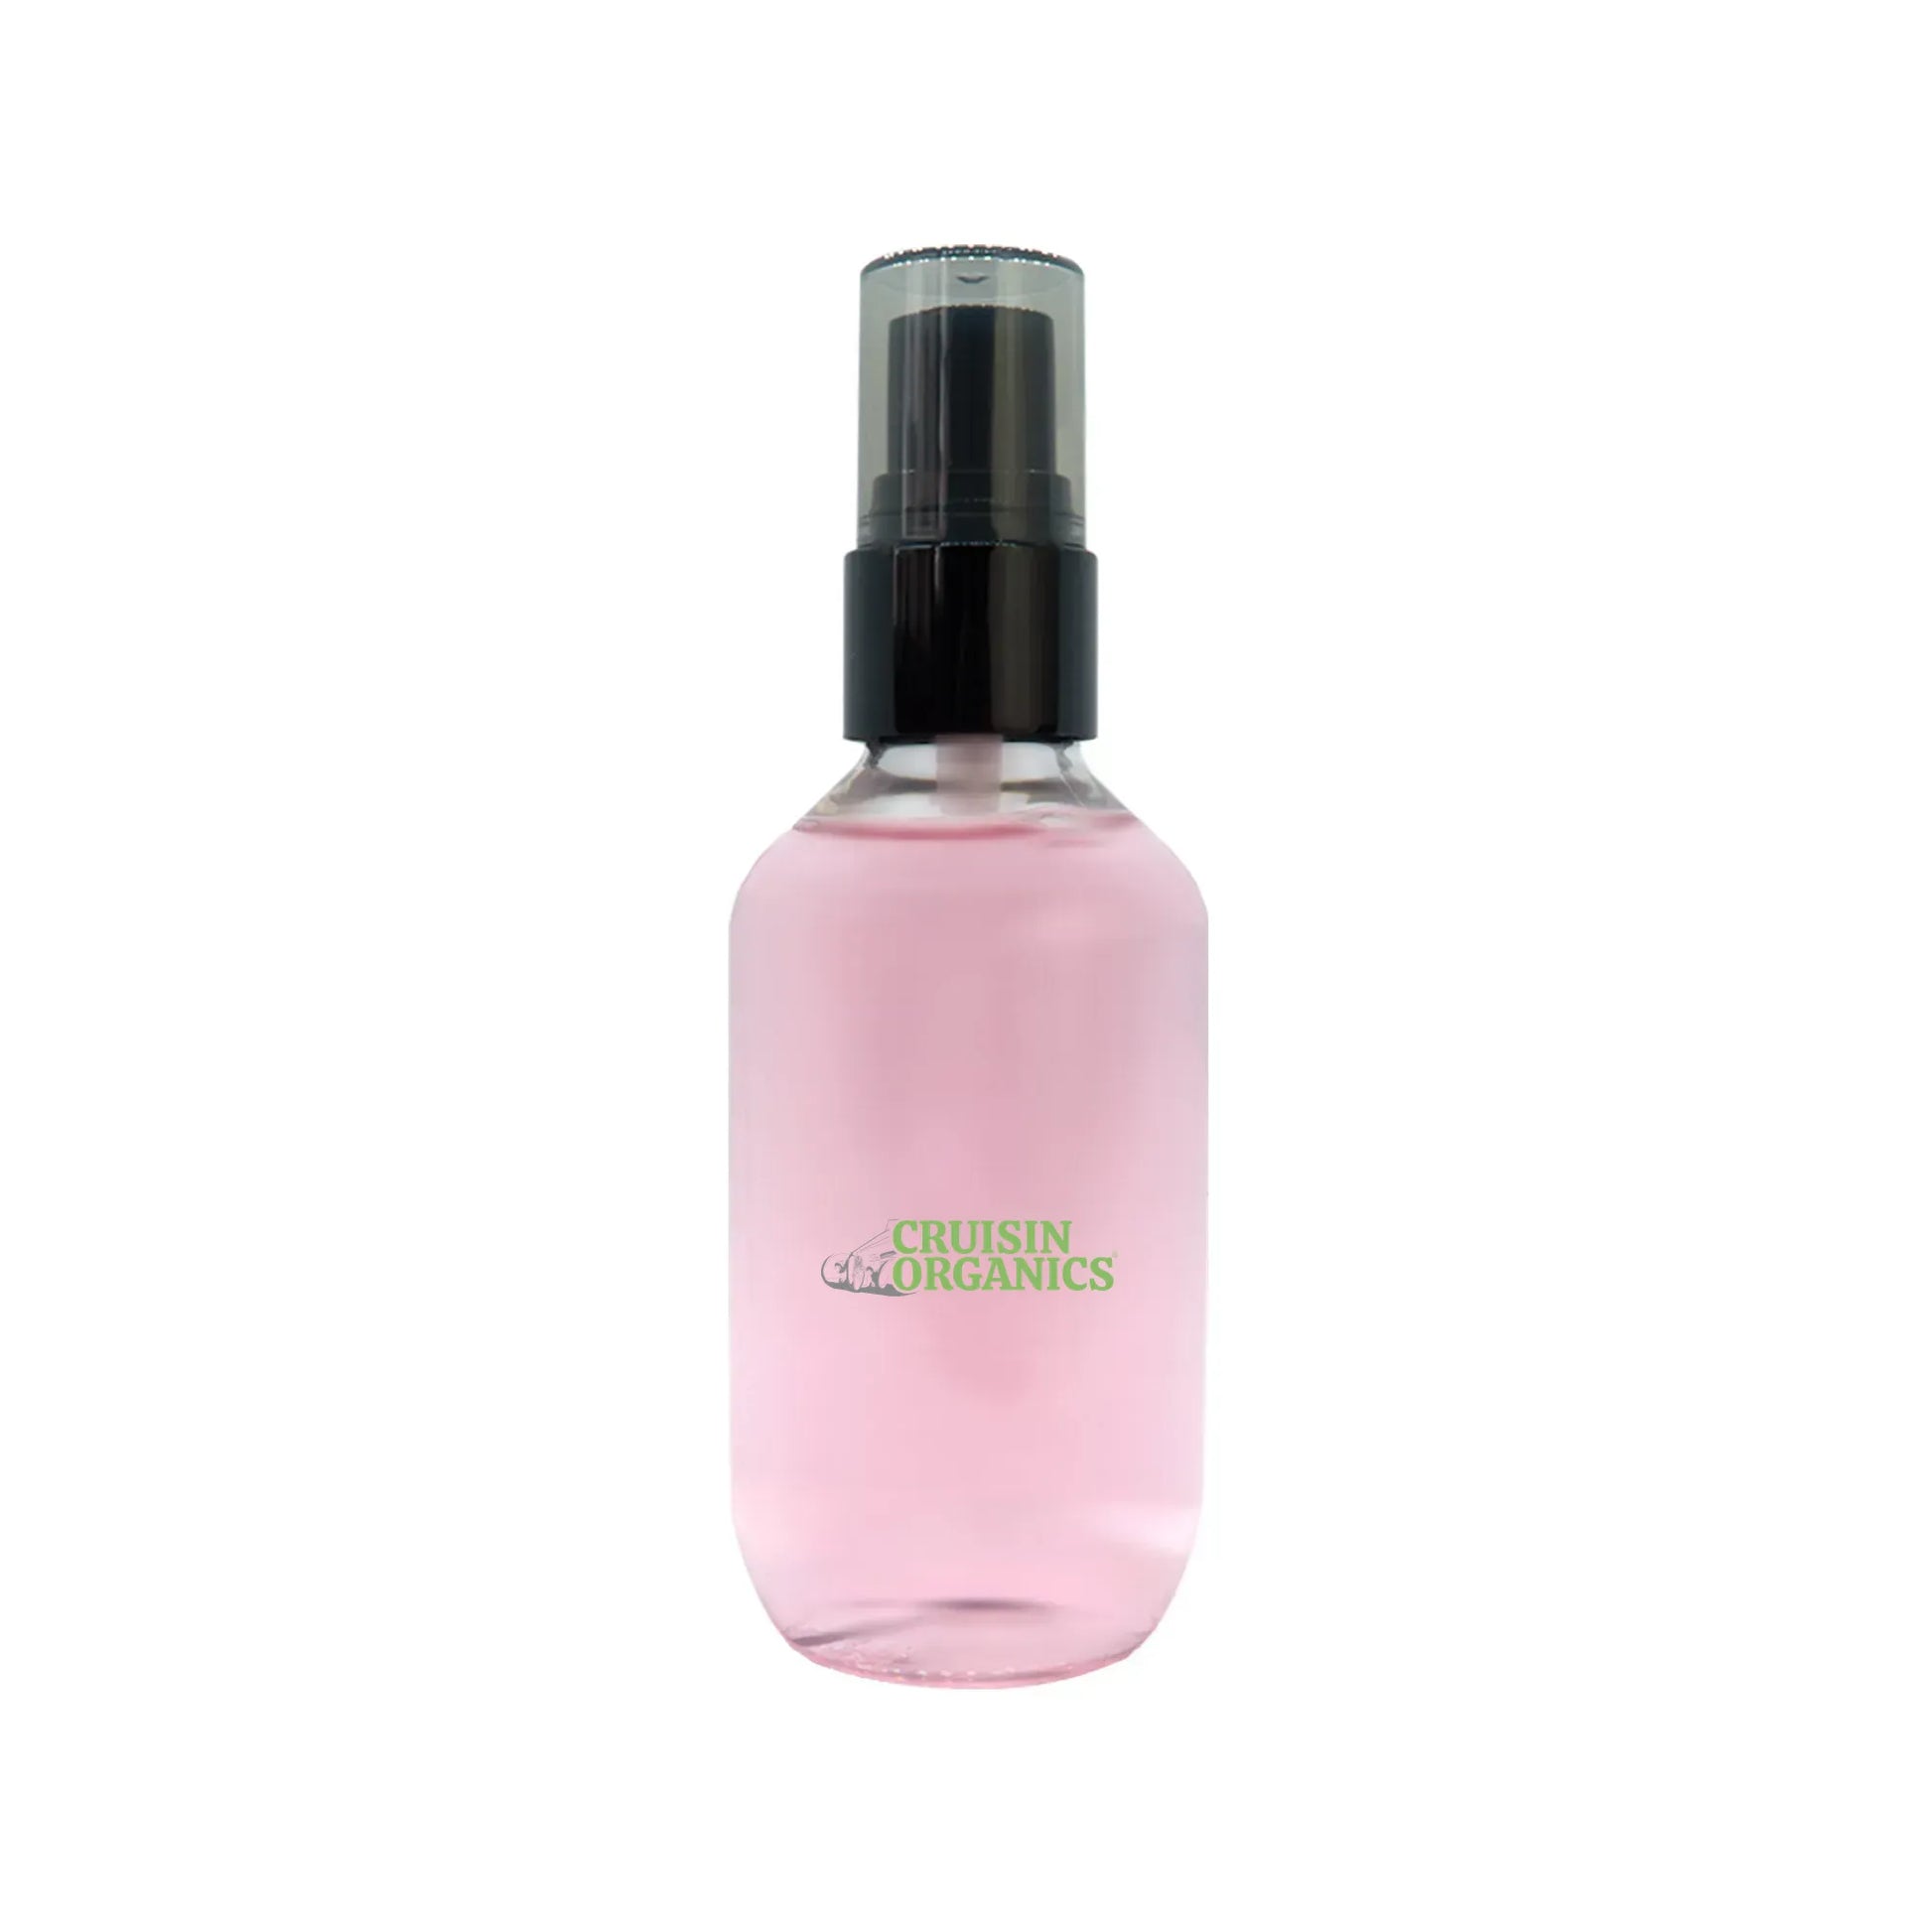 Cruisin Organics Control Setting Spray for Magnolia Oil This nutrient-rich mist, with extracts of witch hazel and magnolia, rapidly revitalizes and gets your skin ready for the day. all at once, protecting delicate skin and applying cosmetics!